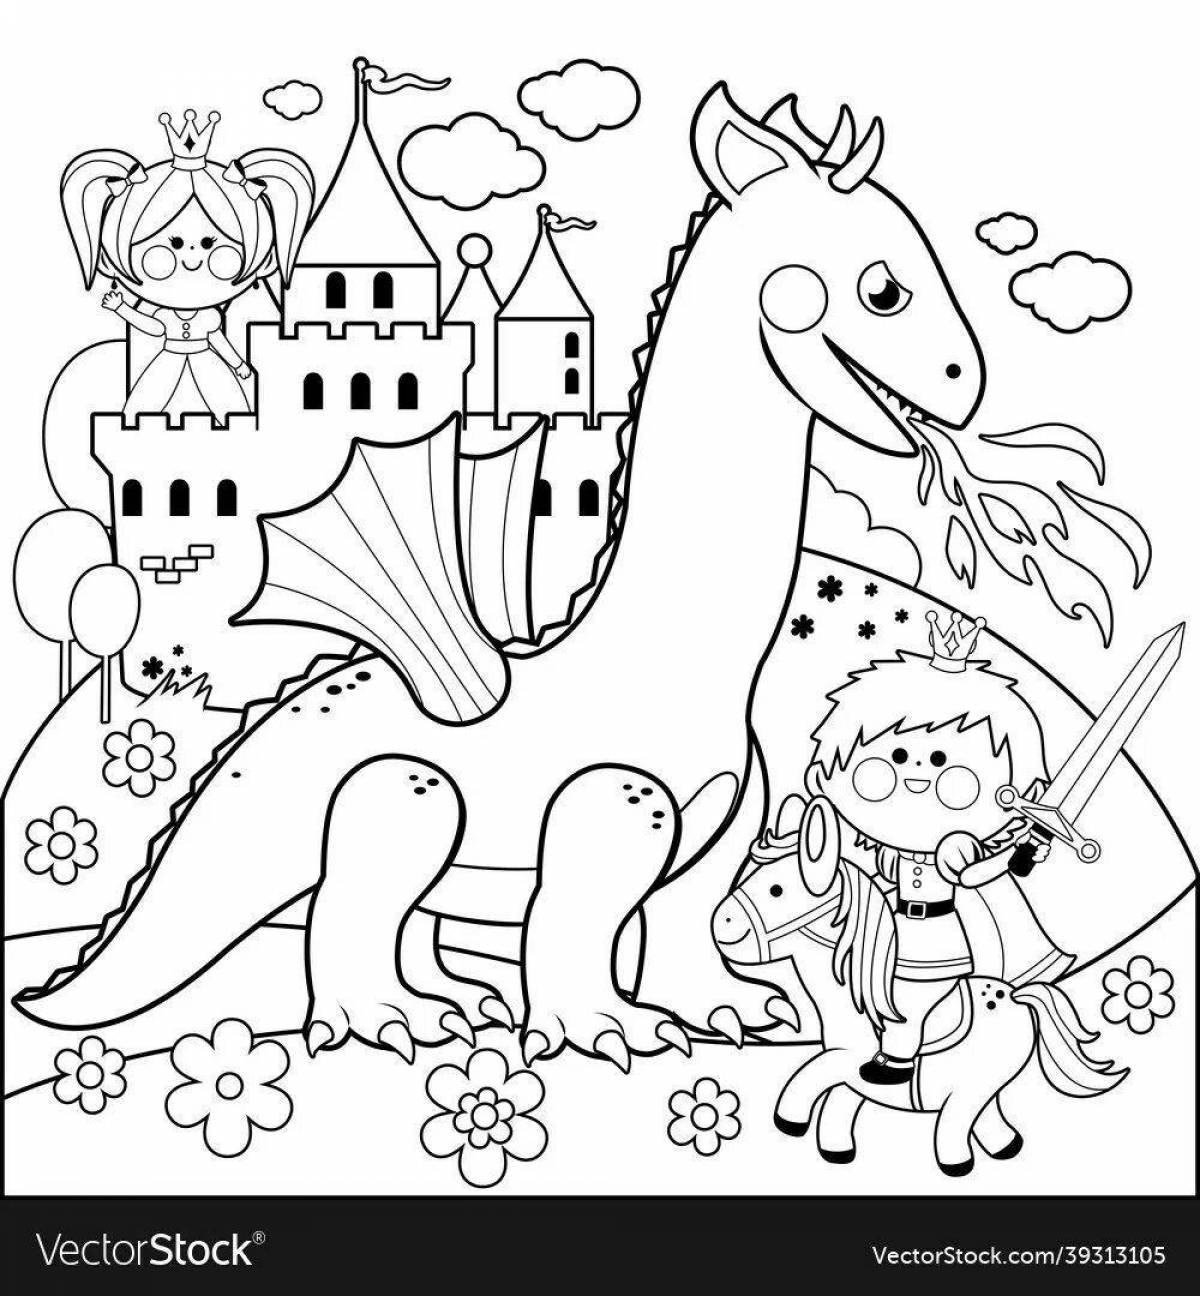 Coloring book magnificent knight and dragon